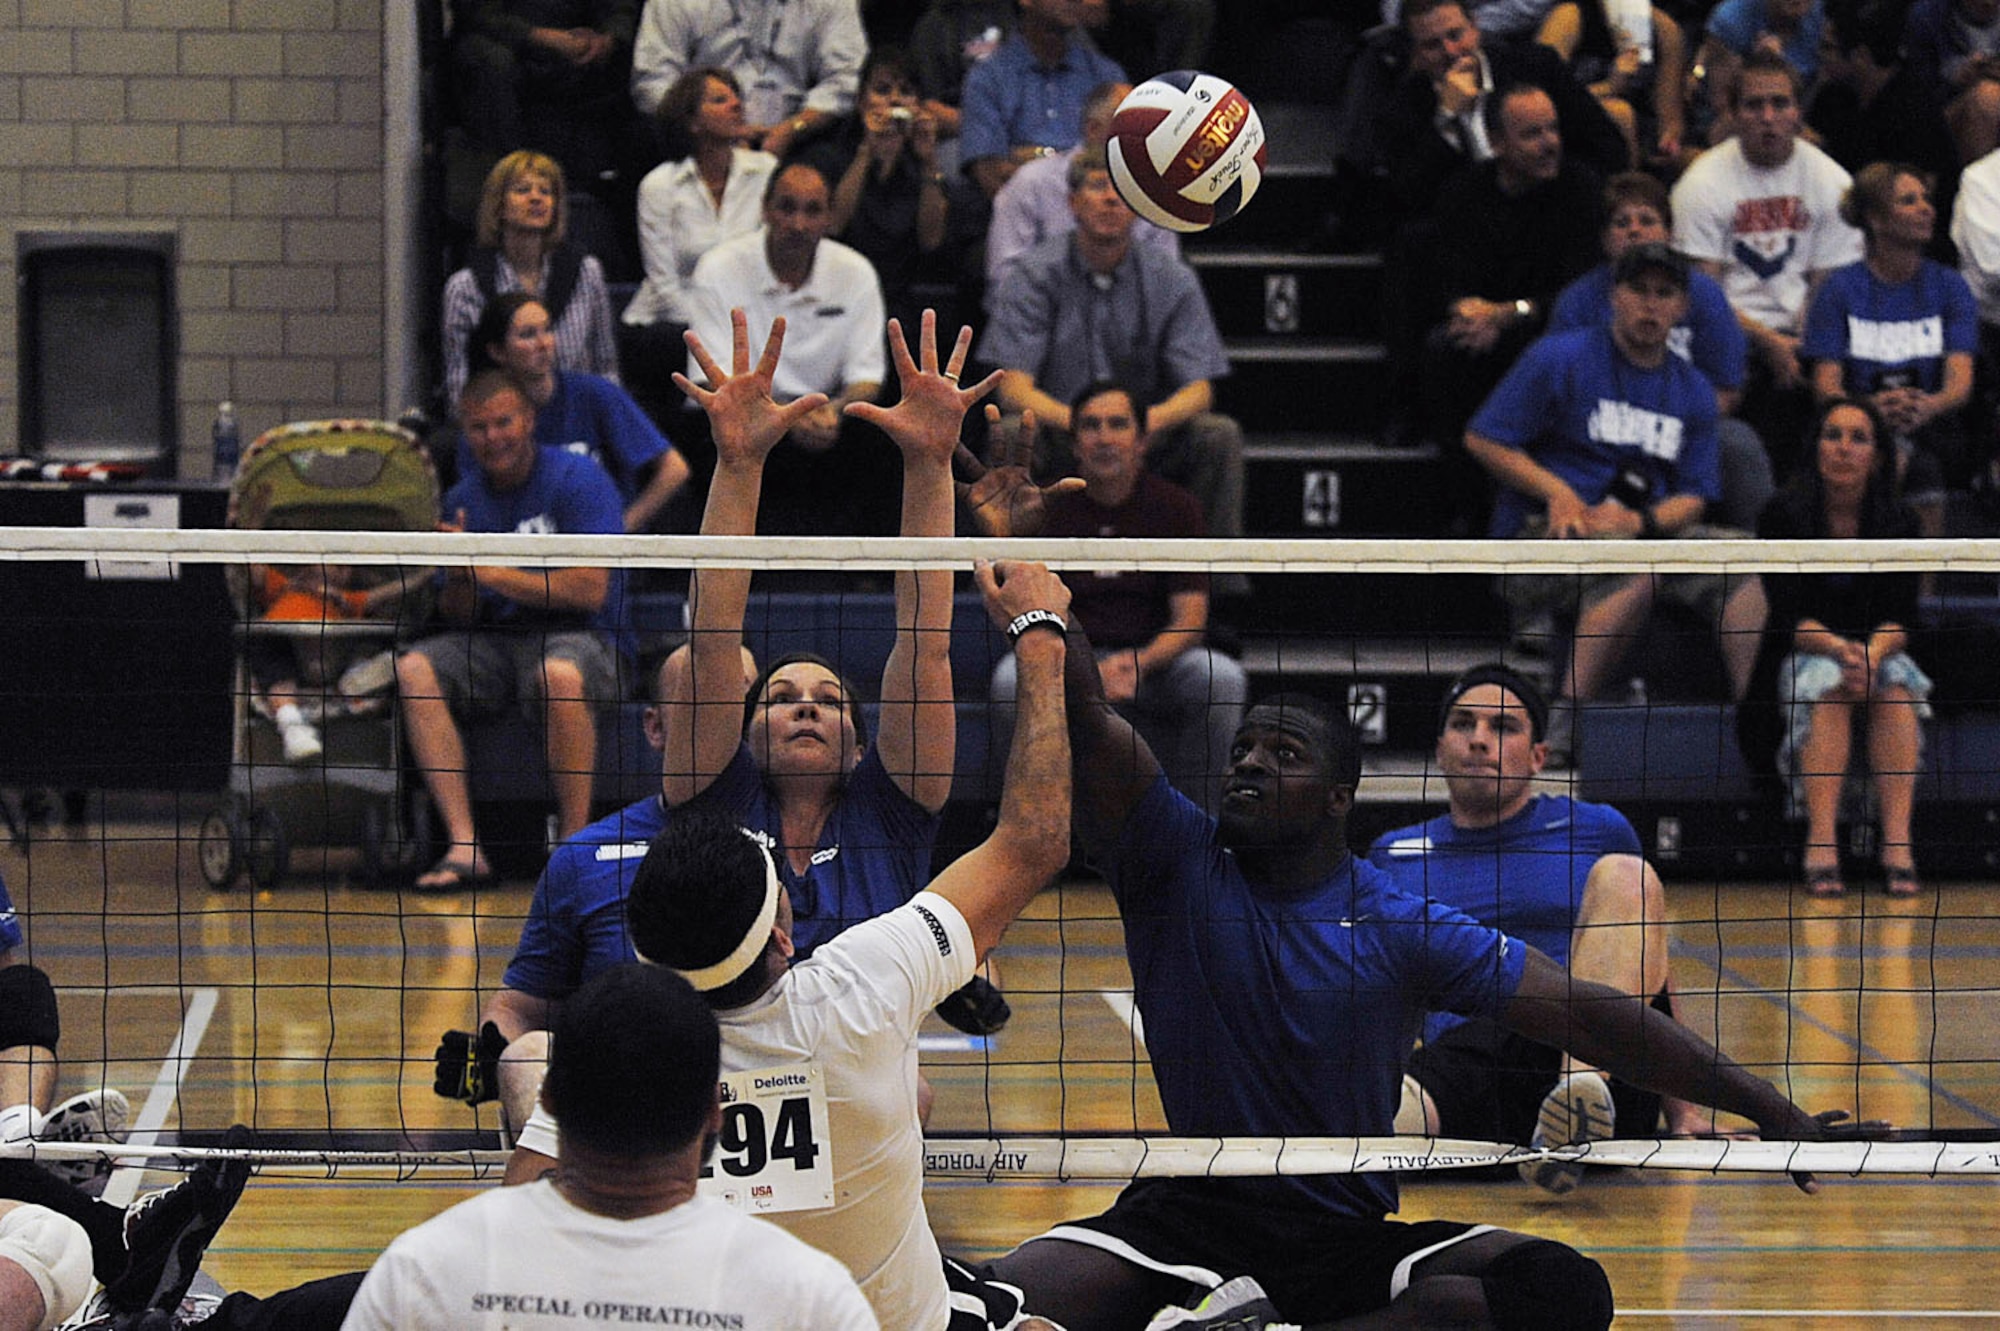 Retired Staff Sgt. Michael Sanders (back right) and Stacy Pearsall, both with the Air Force team, attempt to block the ball during a sitting volleyball game against the Special Operations team at Warrior Games 2012 at the U.S. Air Force Academy in Colorado Springs, Colo., May 1, 2012. Air Force won 41-14.  (U.S. Air Force photo/Val Gempis)